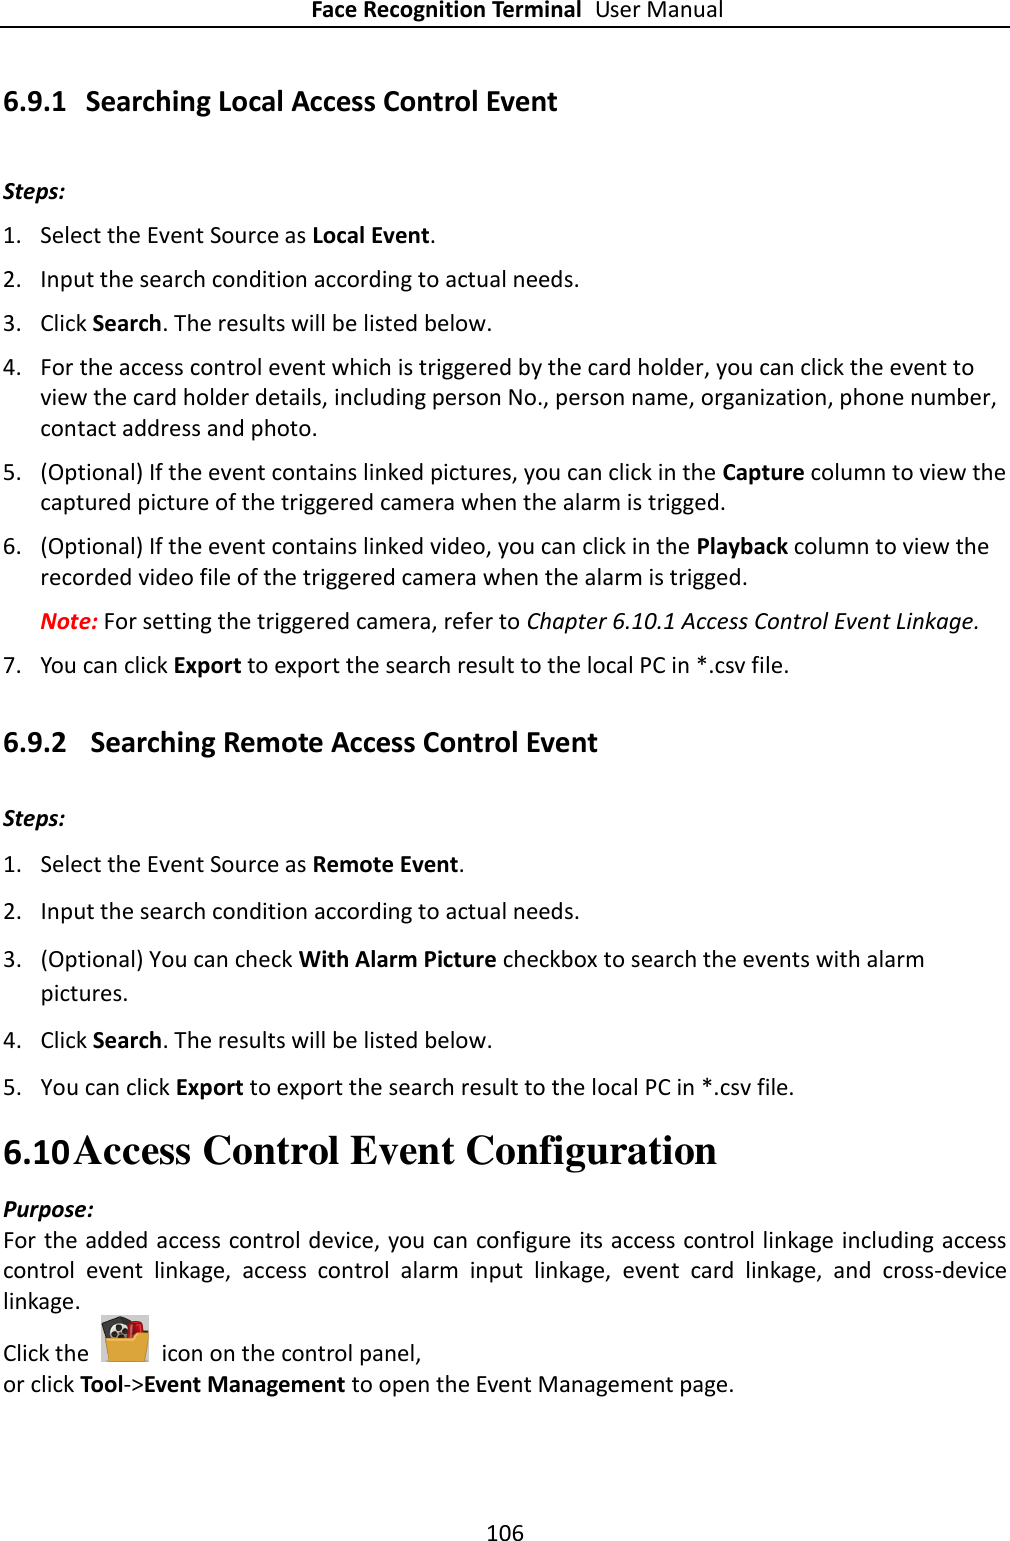 Face Recognition Terminal User Manual 106  6.9.1 Searching Local Access Control Event Steps: 1. Select the Event Source as Local Event. 2. Input the search condition according to actual needs. 3. Click Search. The results will be listed below. 4. For the access control event which is triggered by the card holder, you can click the event to view the card holder details, including person No., person name, organization, phone number, contact address and photo. 5. (Optional) If the event contains linked pictures, you can click in the Capture column to view the captured picture of the triggered camera when the alarm is trigged. 6. (Optional) If the event contains linked video, you can click in the Playback column to view the recorded video file of the triggered camera when the alarm is trigged. Note: For setting the triggered camera, refer to Chapter 6.10.1 Access Control Event Linkage. 7. You can click Export to export the search result to the local PC in *.csv file. 6.9.2 Searching Remote Access Control Event Steps: 1. Select the Event Source as Remote Event. 2. Input the search condition according to actual needs. 3. (Optional) You can check With Alarm Picture checkbox to search the events with alarm pictures. 4. Click Search. The results will be listed below. 5. You can click Export to export the search result to the local PC in *.csv file. 6.10 Access Control Event Configuration Purpose: For the added access control device, you can configure its access control linkage including access control  event  linkage,  access  control  alarm  input  linkage,  event  card  linkage,  and  cross-device linkage. Click the    icon on the control panel, or click Tool-&gt;Event Management to open the Event Management page. 